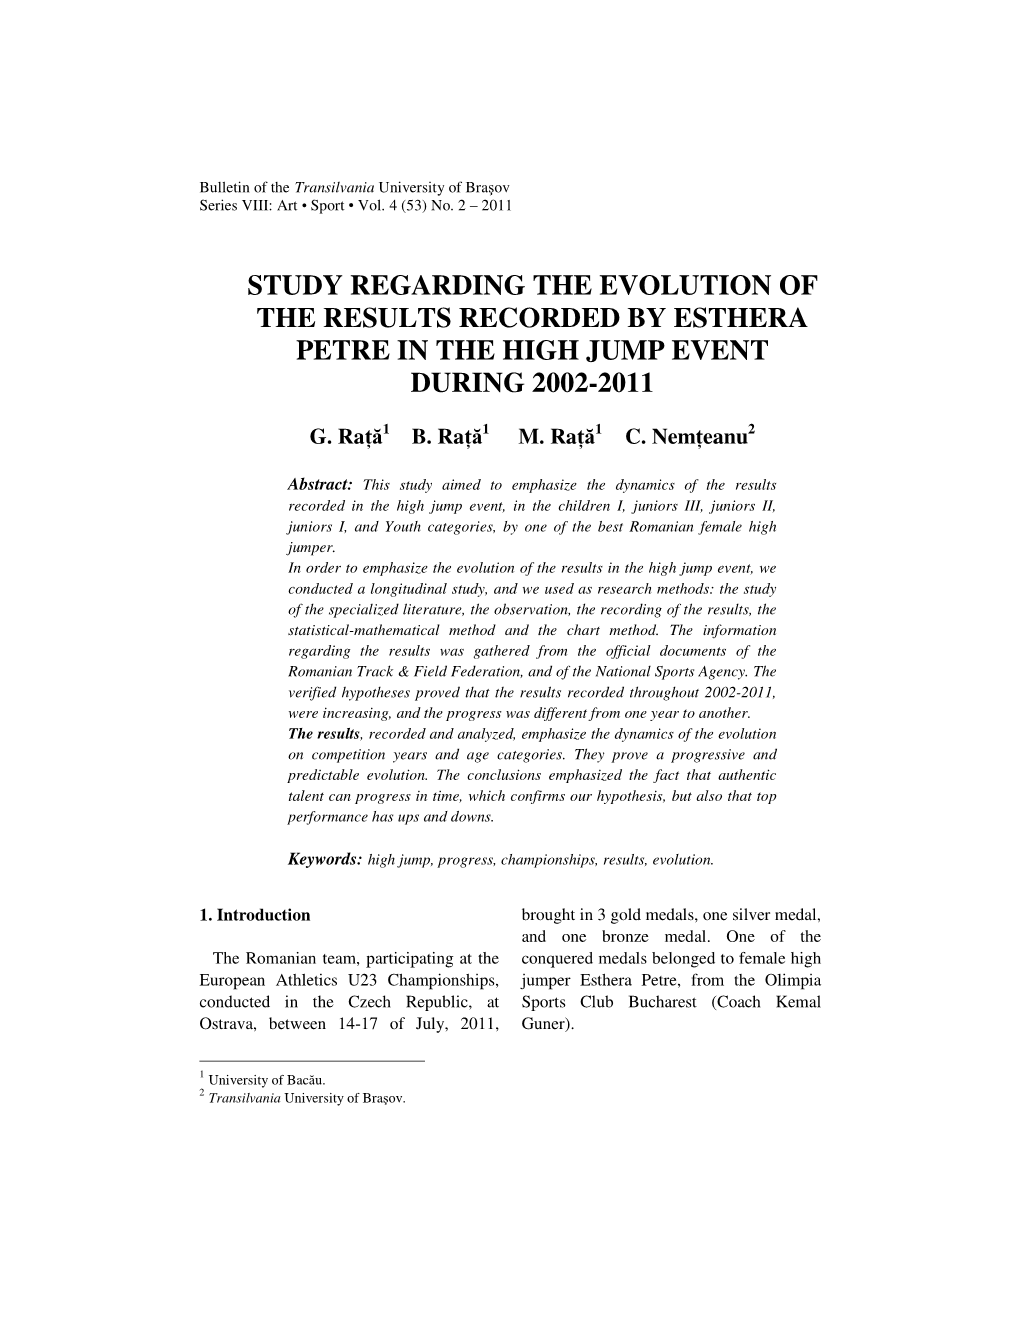 Study Regarding the Evolution of the Results Recorded by Esthera Petre in the High Jump Event During 2002-2011